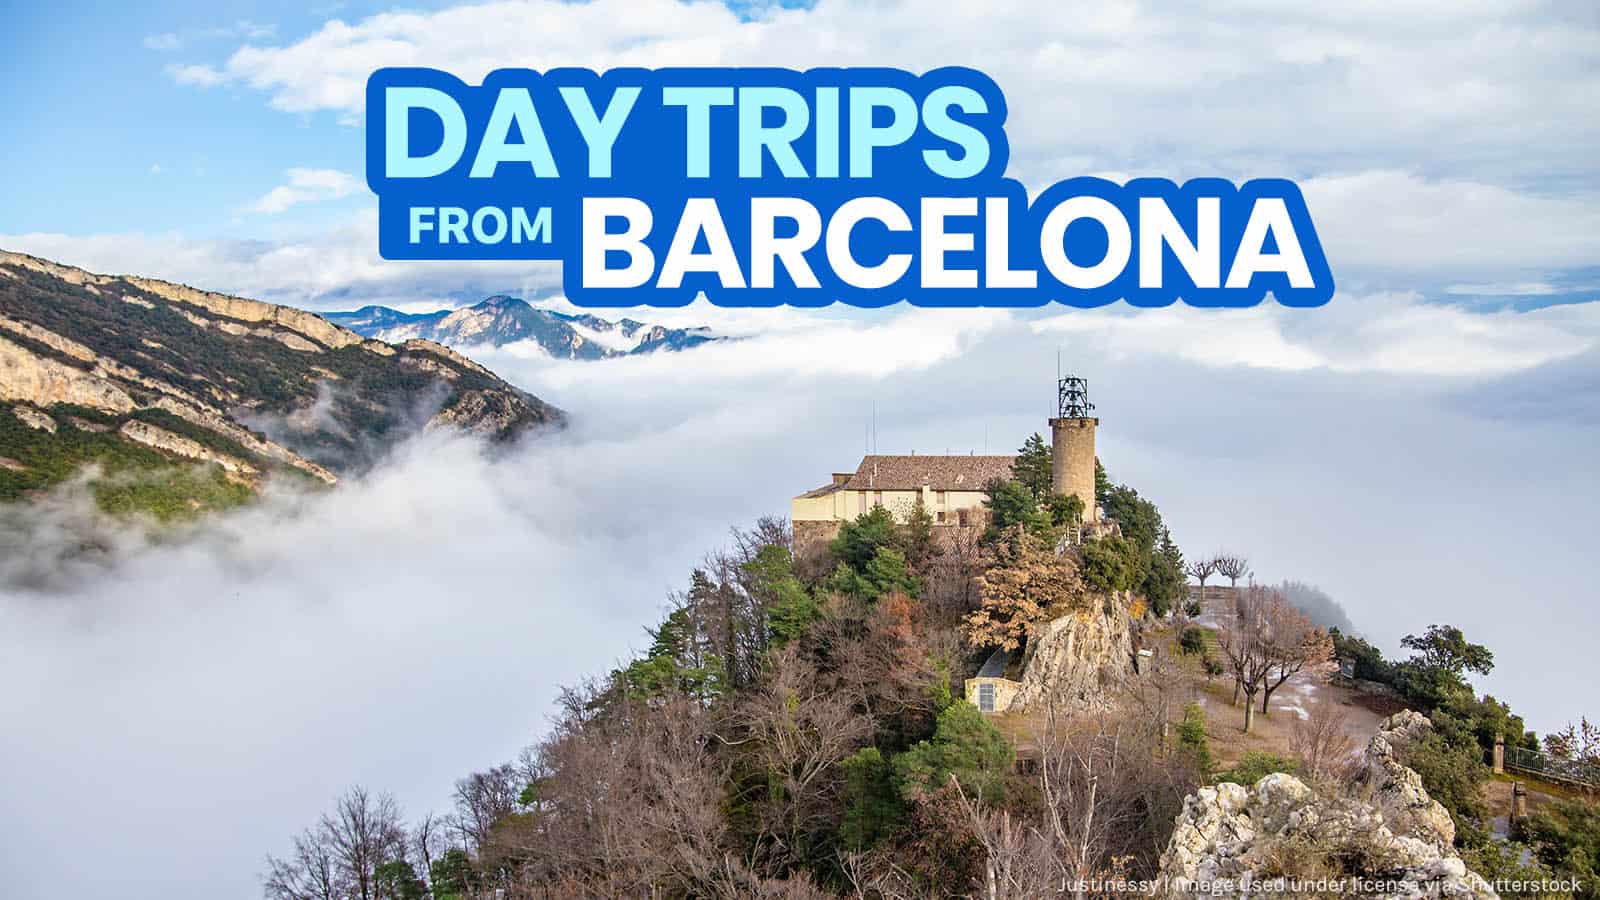 15 BEST DAY TRIPS FROM BARCELONA